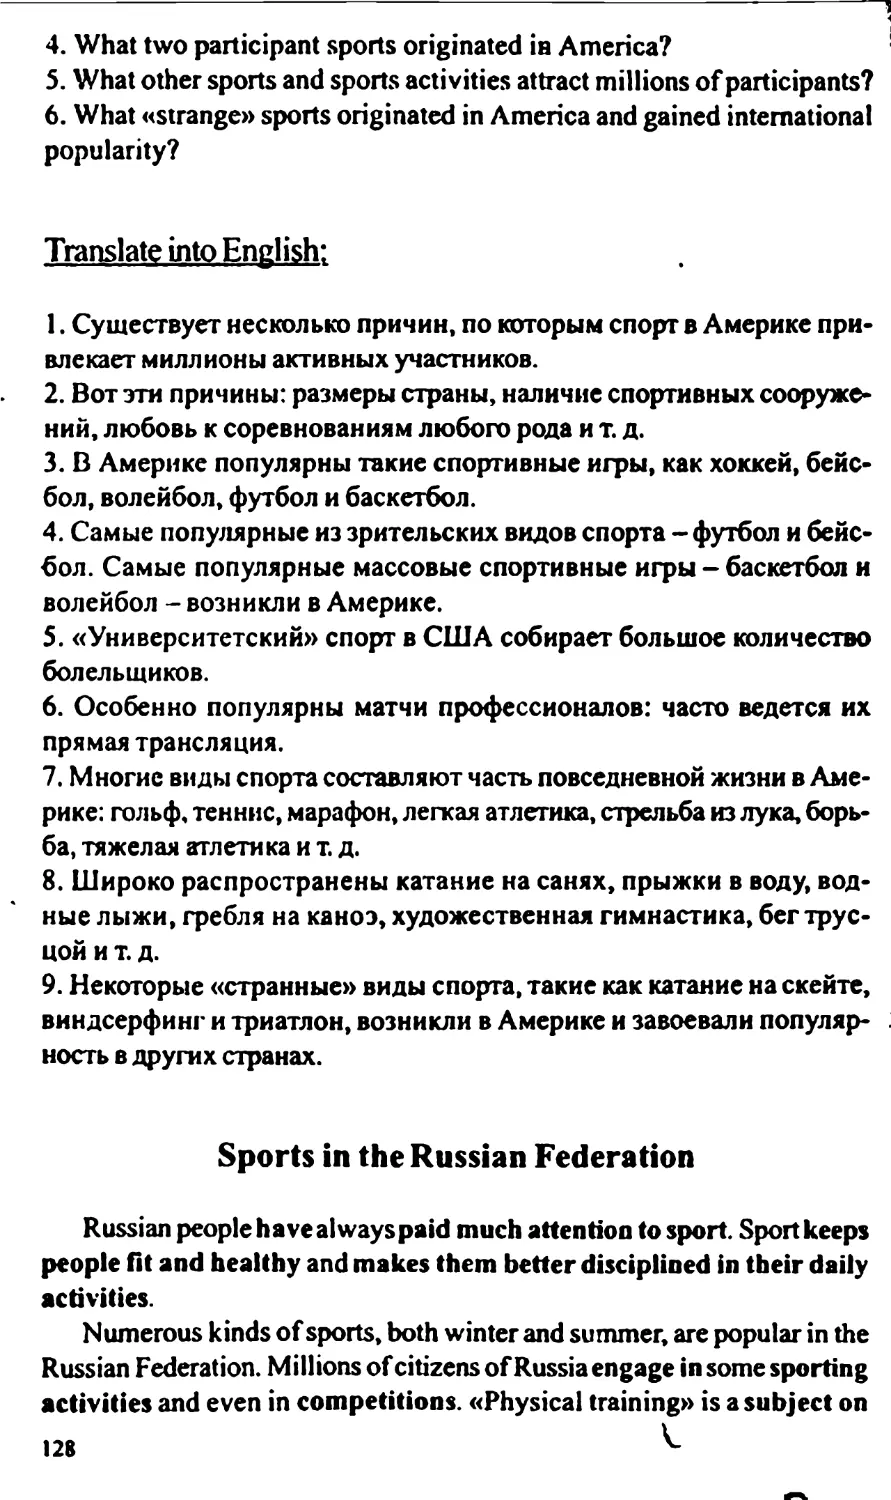 Sports in the Russian Federation